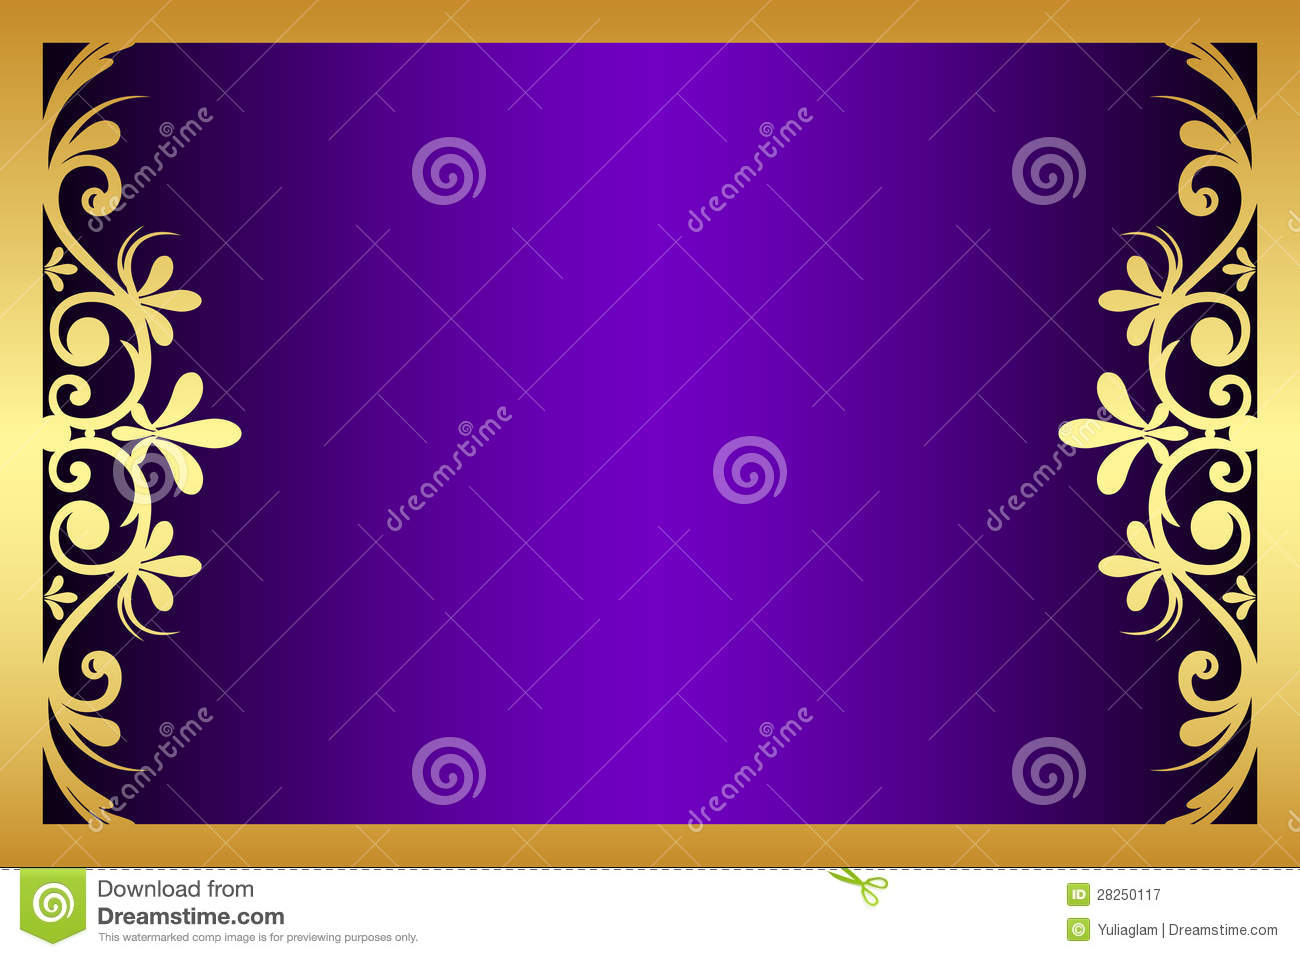 Purple and Gold Borders